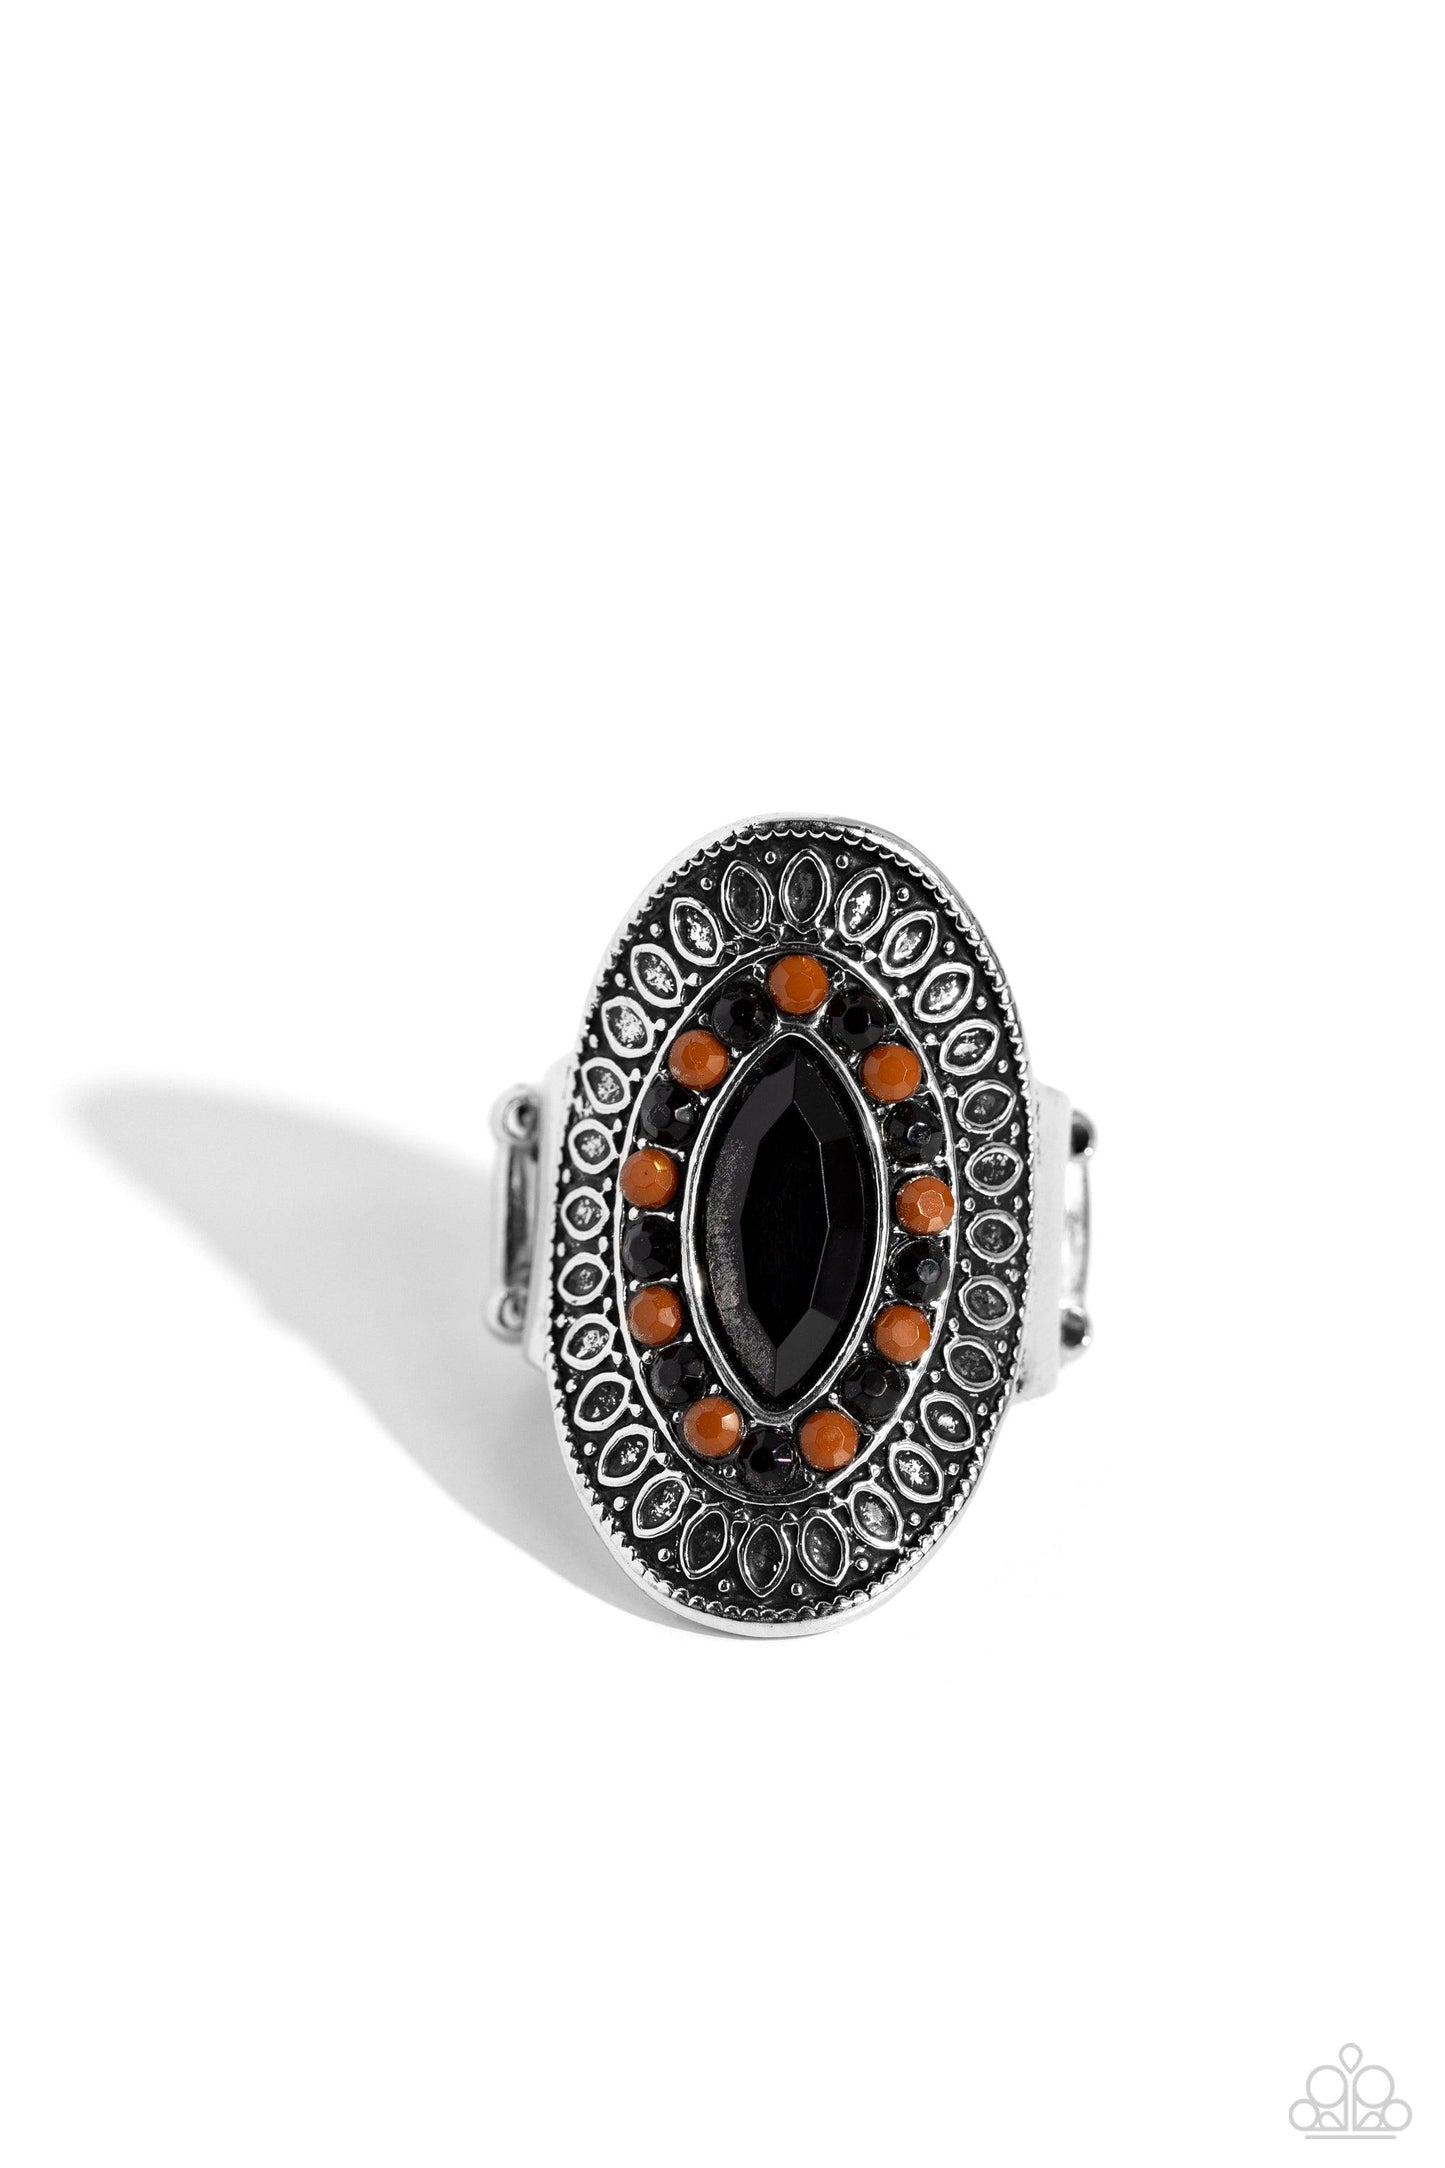 Paparazzi Accessories - ARTISAN Expression - Black Ring - Bling by JessieK